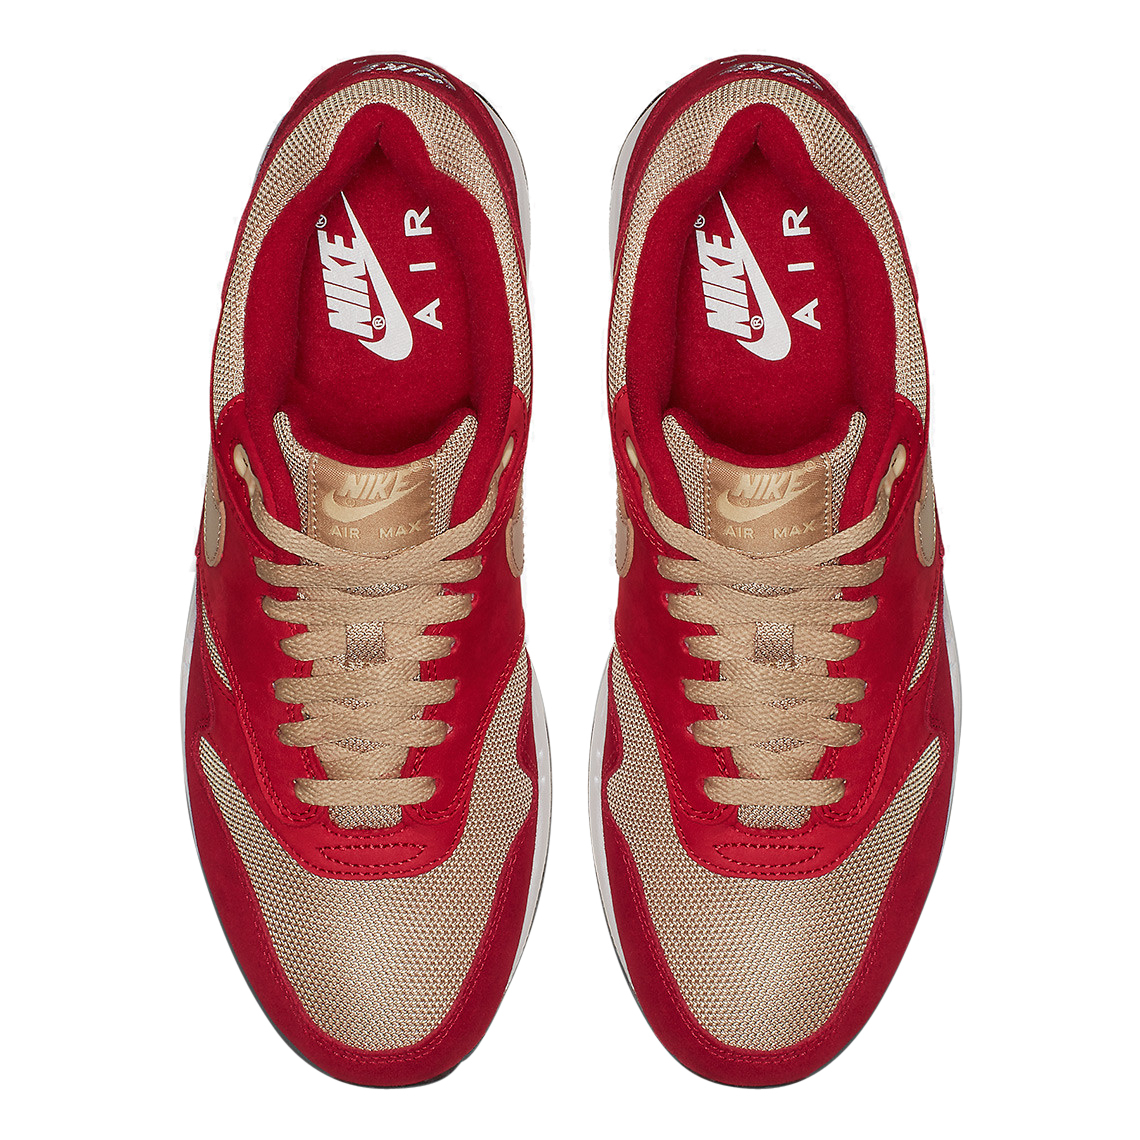 Nike Air Max 1 Red Curry - May 2018 - 908366-600